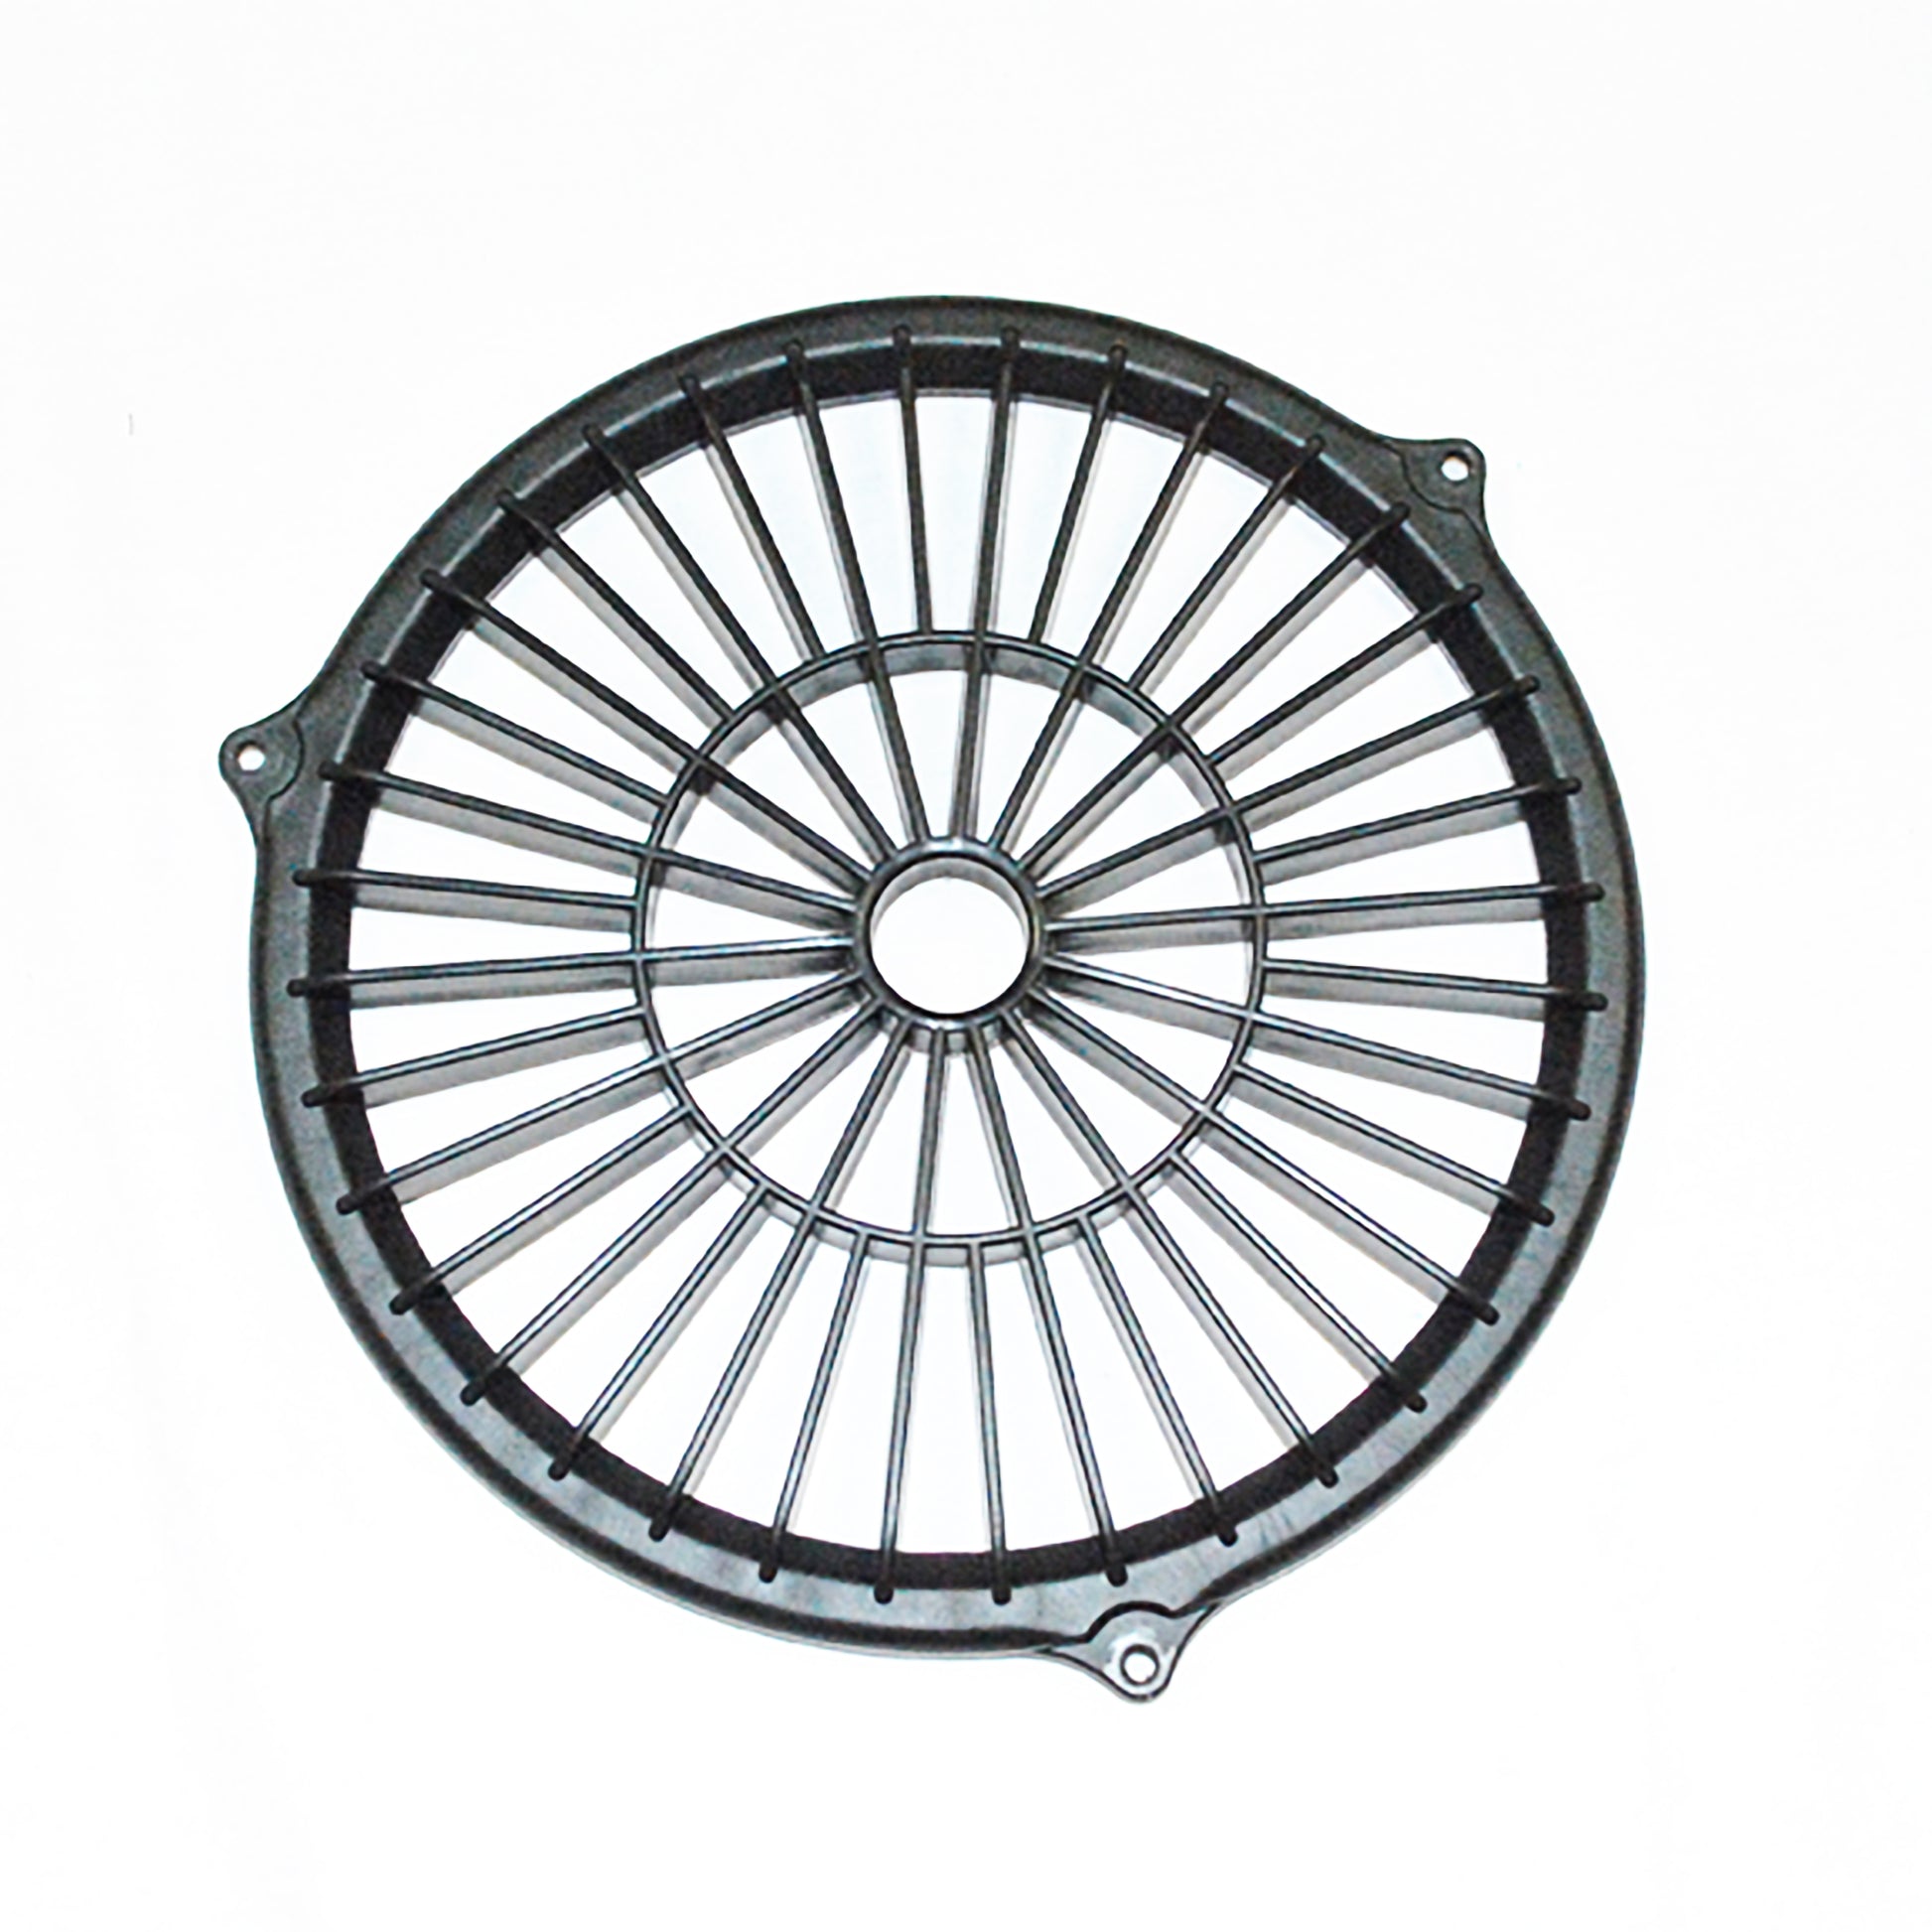 Fan Side Grille Cover for P-80A Air Mover